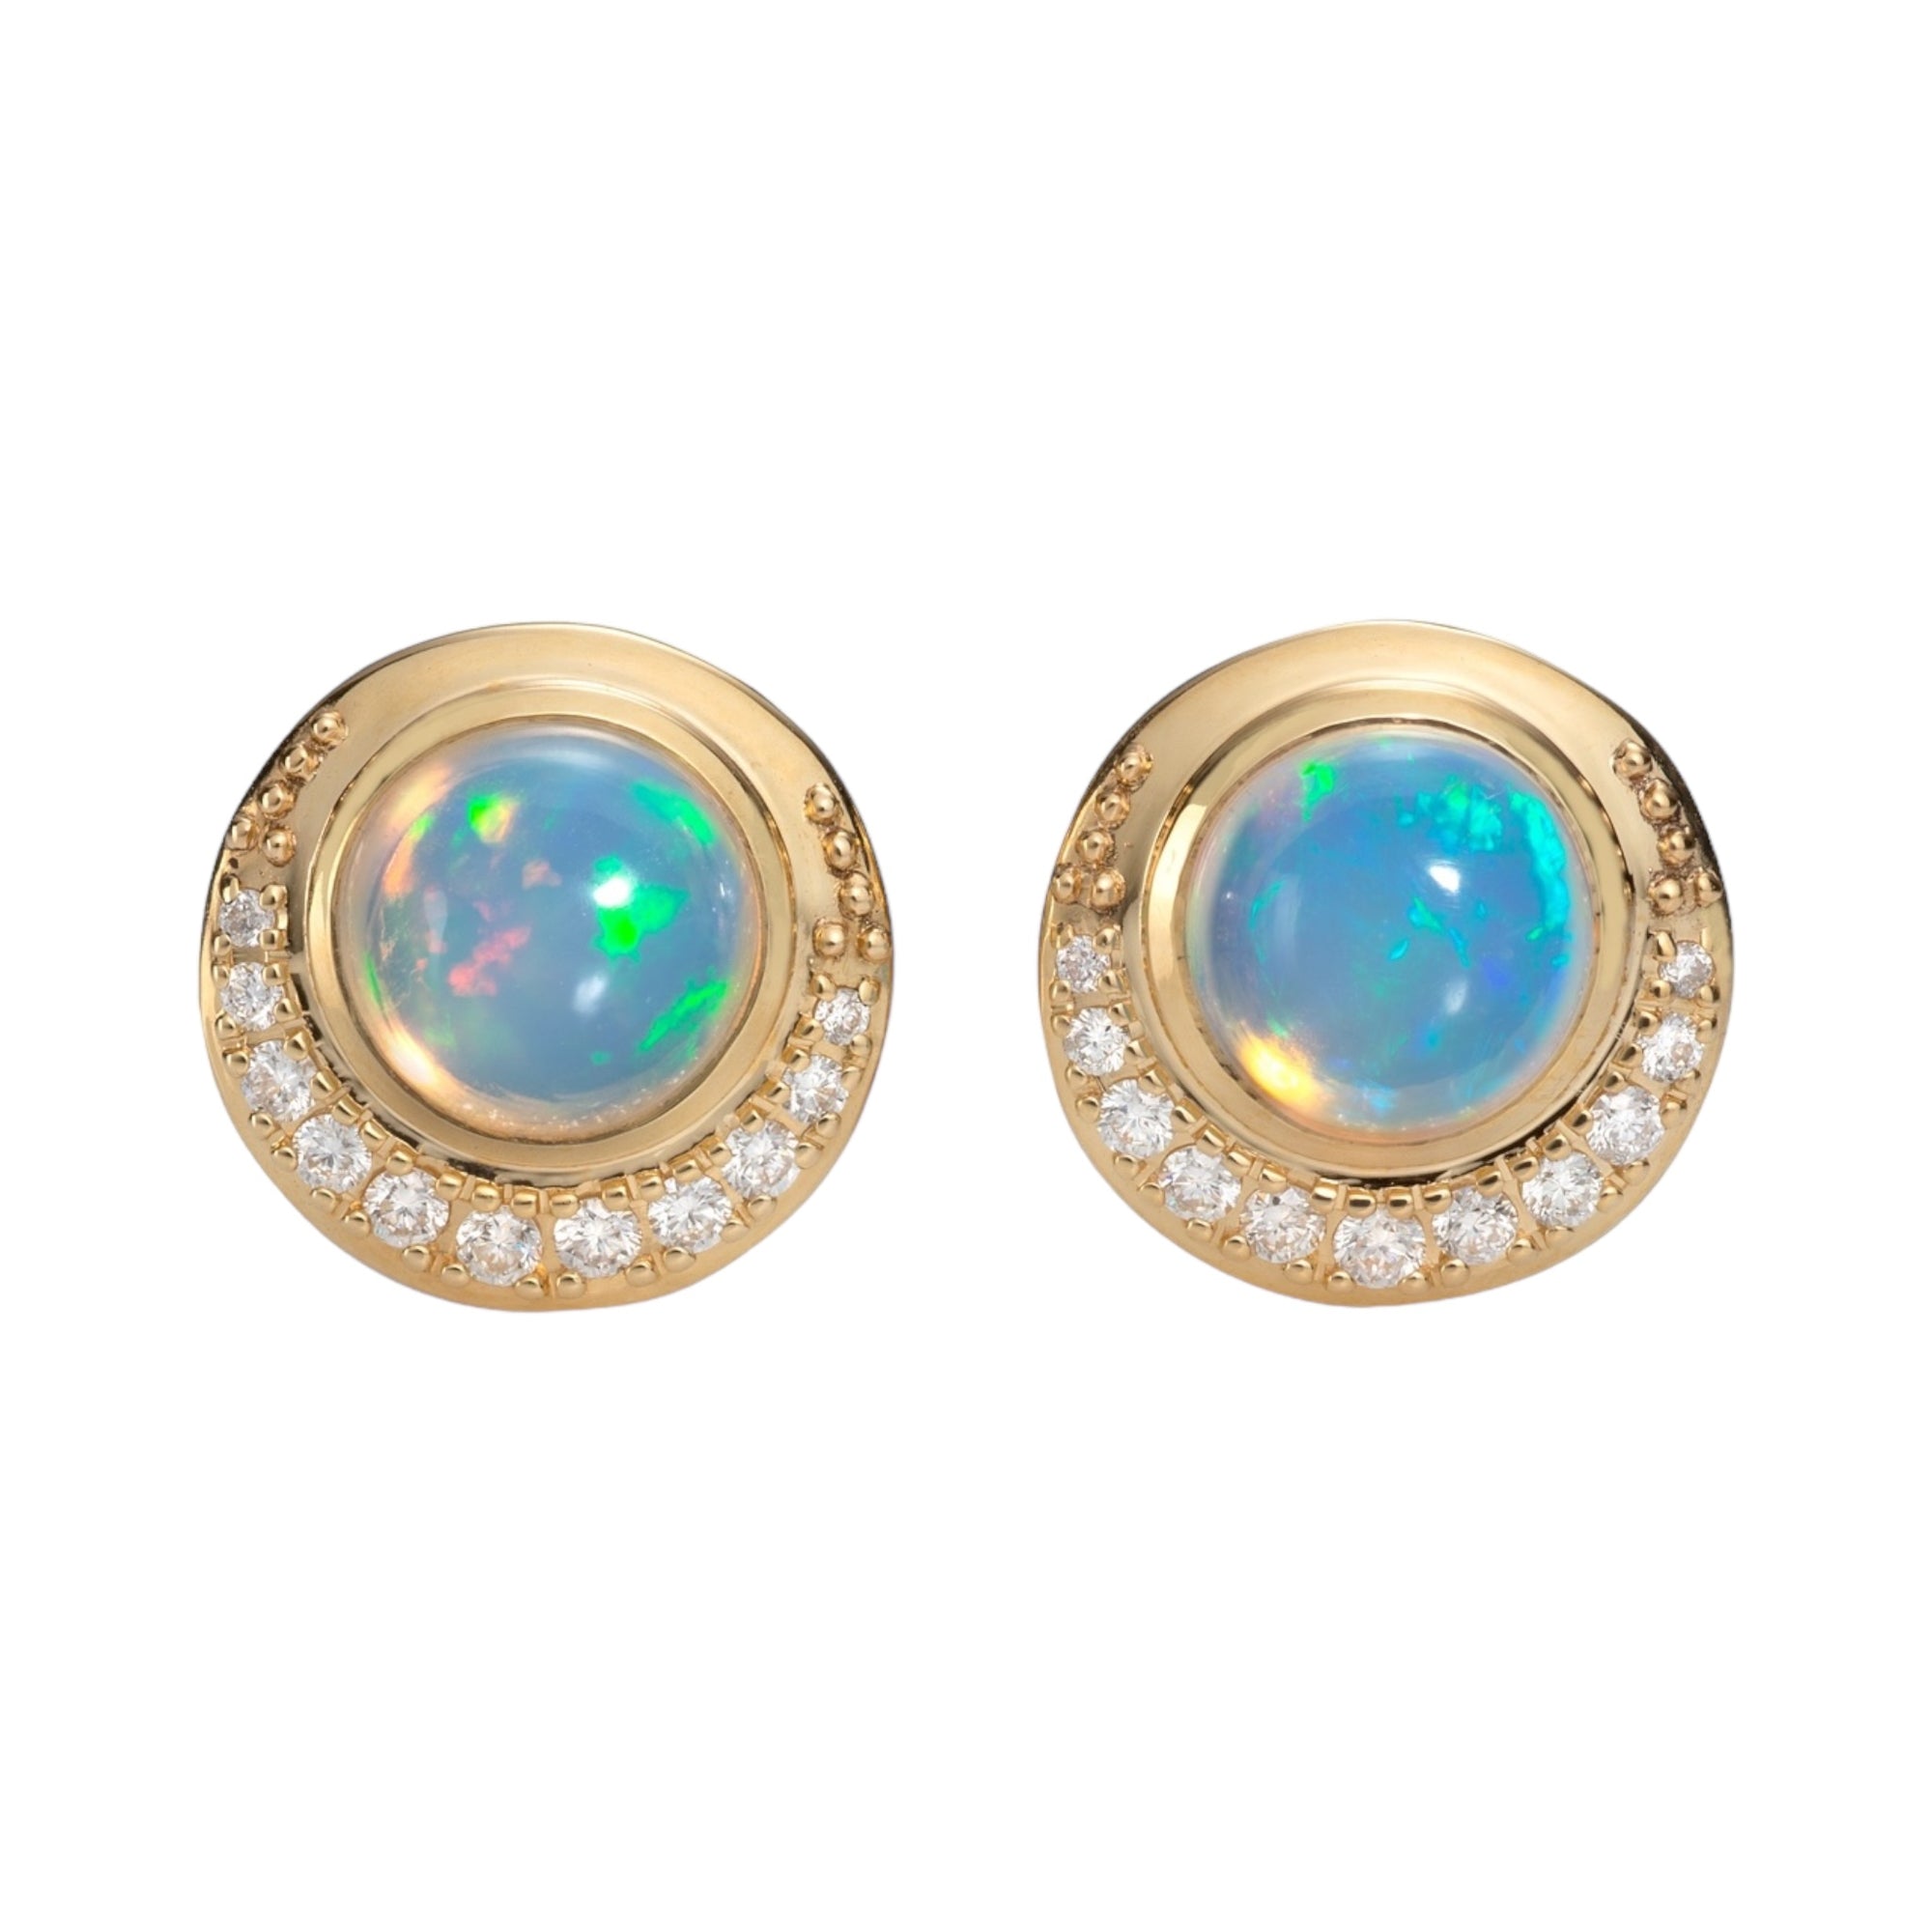 Blue Hour Button Earrings by Martha Seely available at Talisman Collection Fine Jewelers in El Dorado Hills, CA and online. Transform your look with these stunning Blue Hour Button Earrings. Crafted with 8mm Welo Opals and 0.276 carats of sparkling diamonds set in 14k gold, these earrings add a touch of sophistication and luxury, making them the for any occasion.